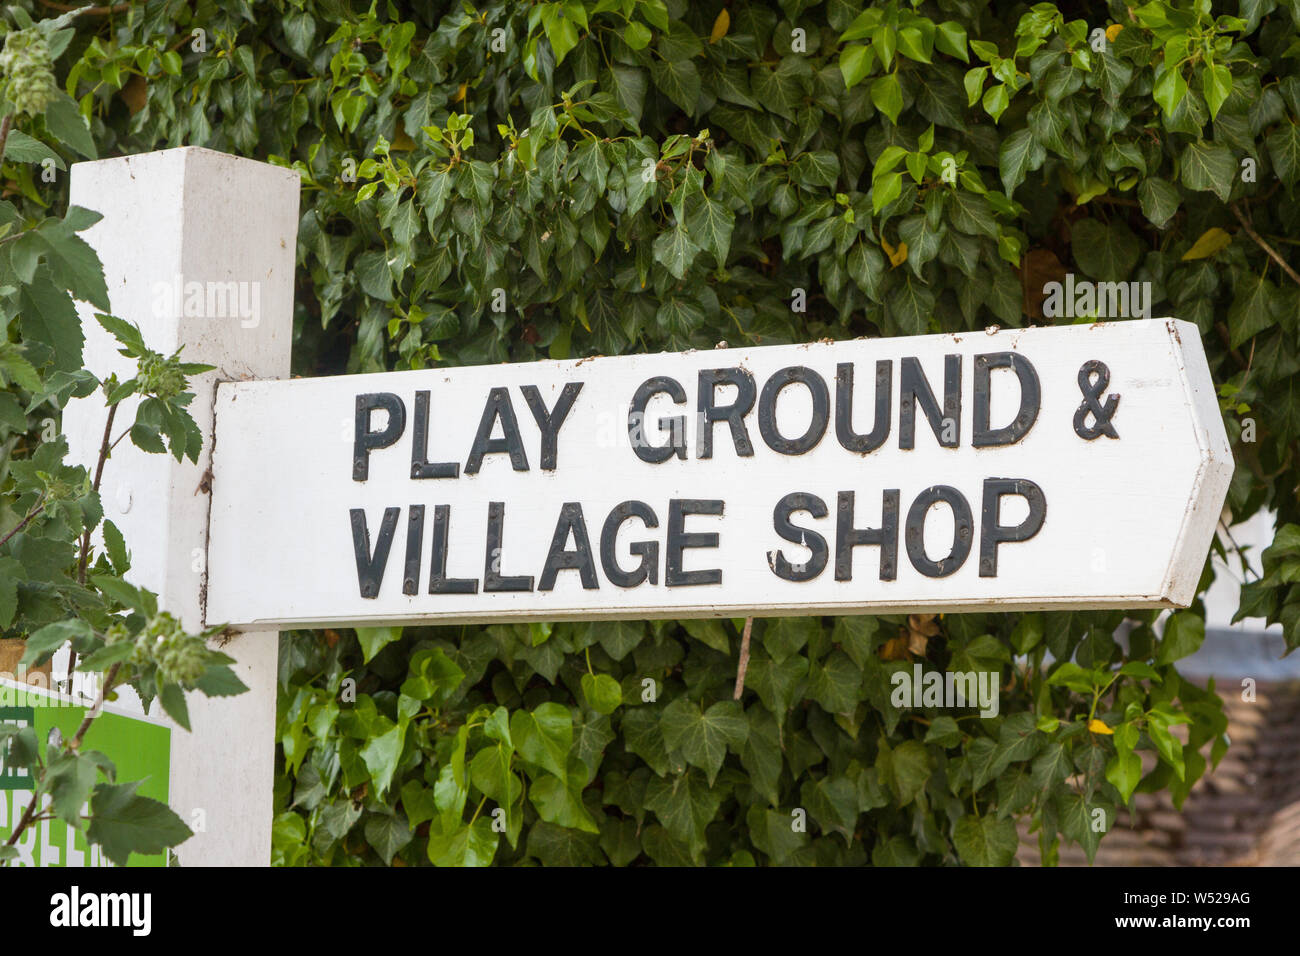 A wooden sign to the playground and village shop in the village of South Stoke, Oxfordshire, Stock Photo